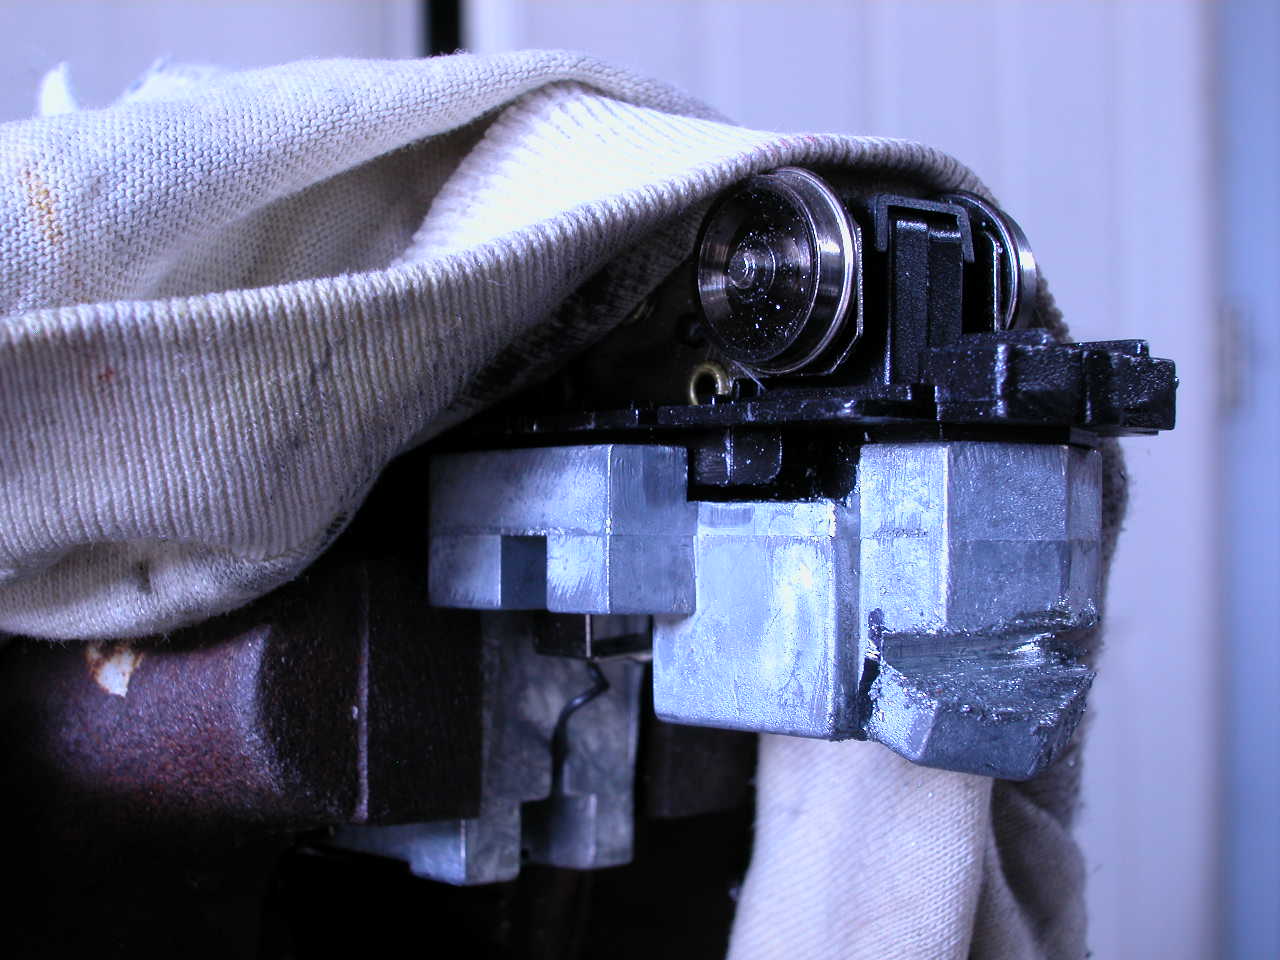 GP30SSW5009_Headlight_conversion_and_weathering_8-14-2011_08-52-01